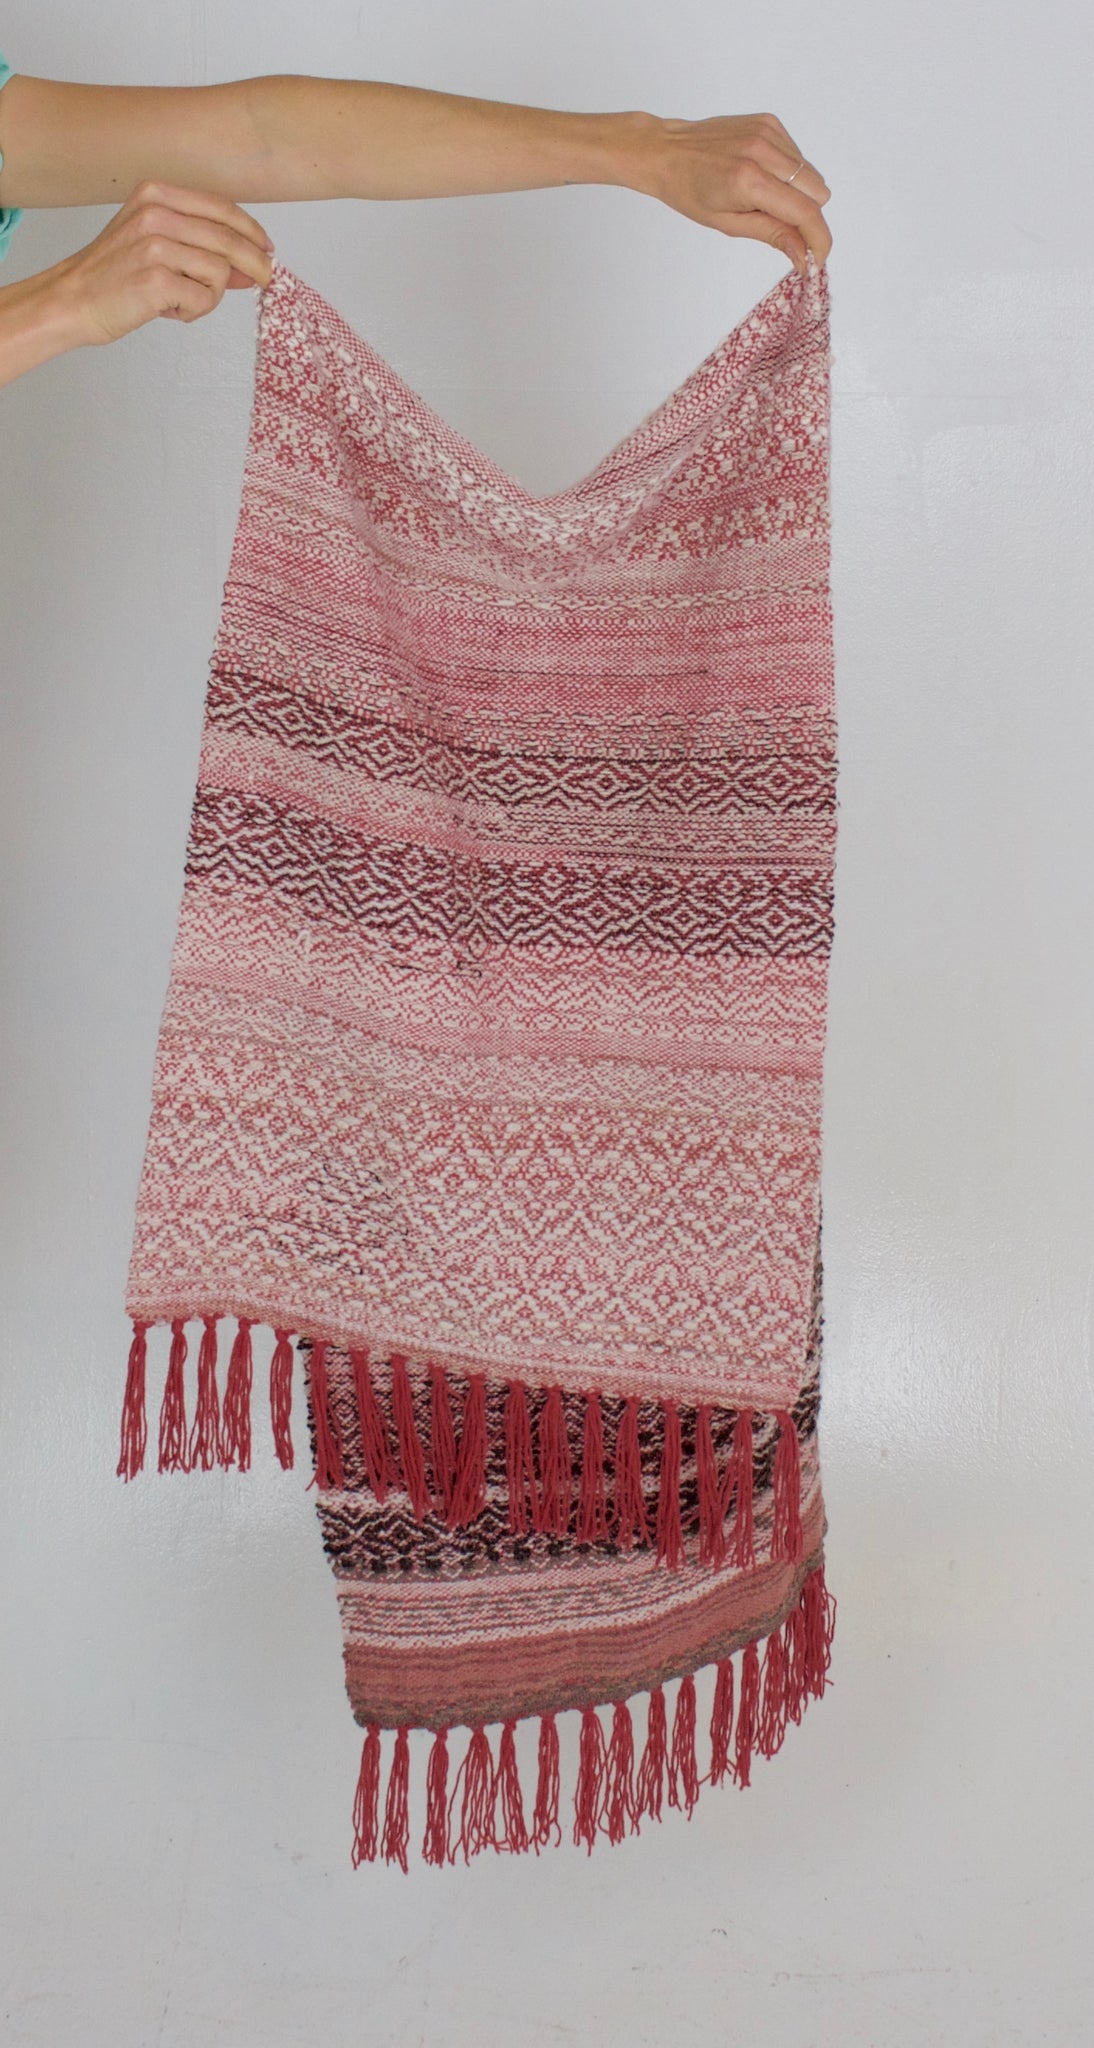 Anise - Wool and Cashmere Shawl